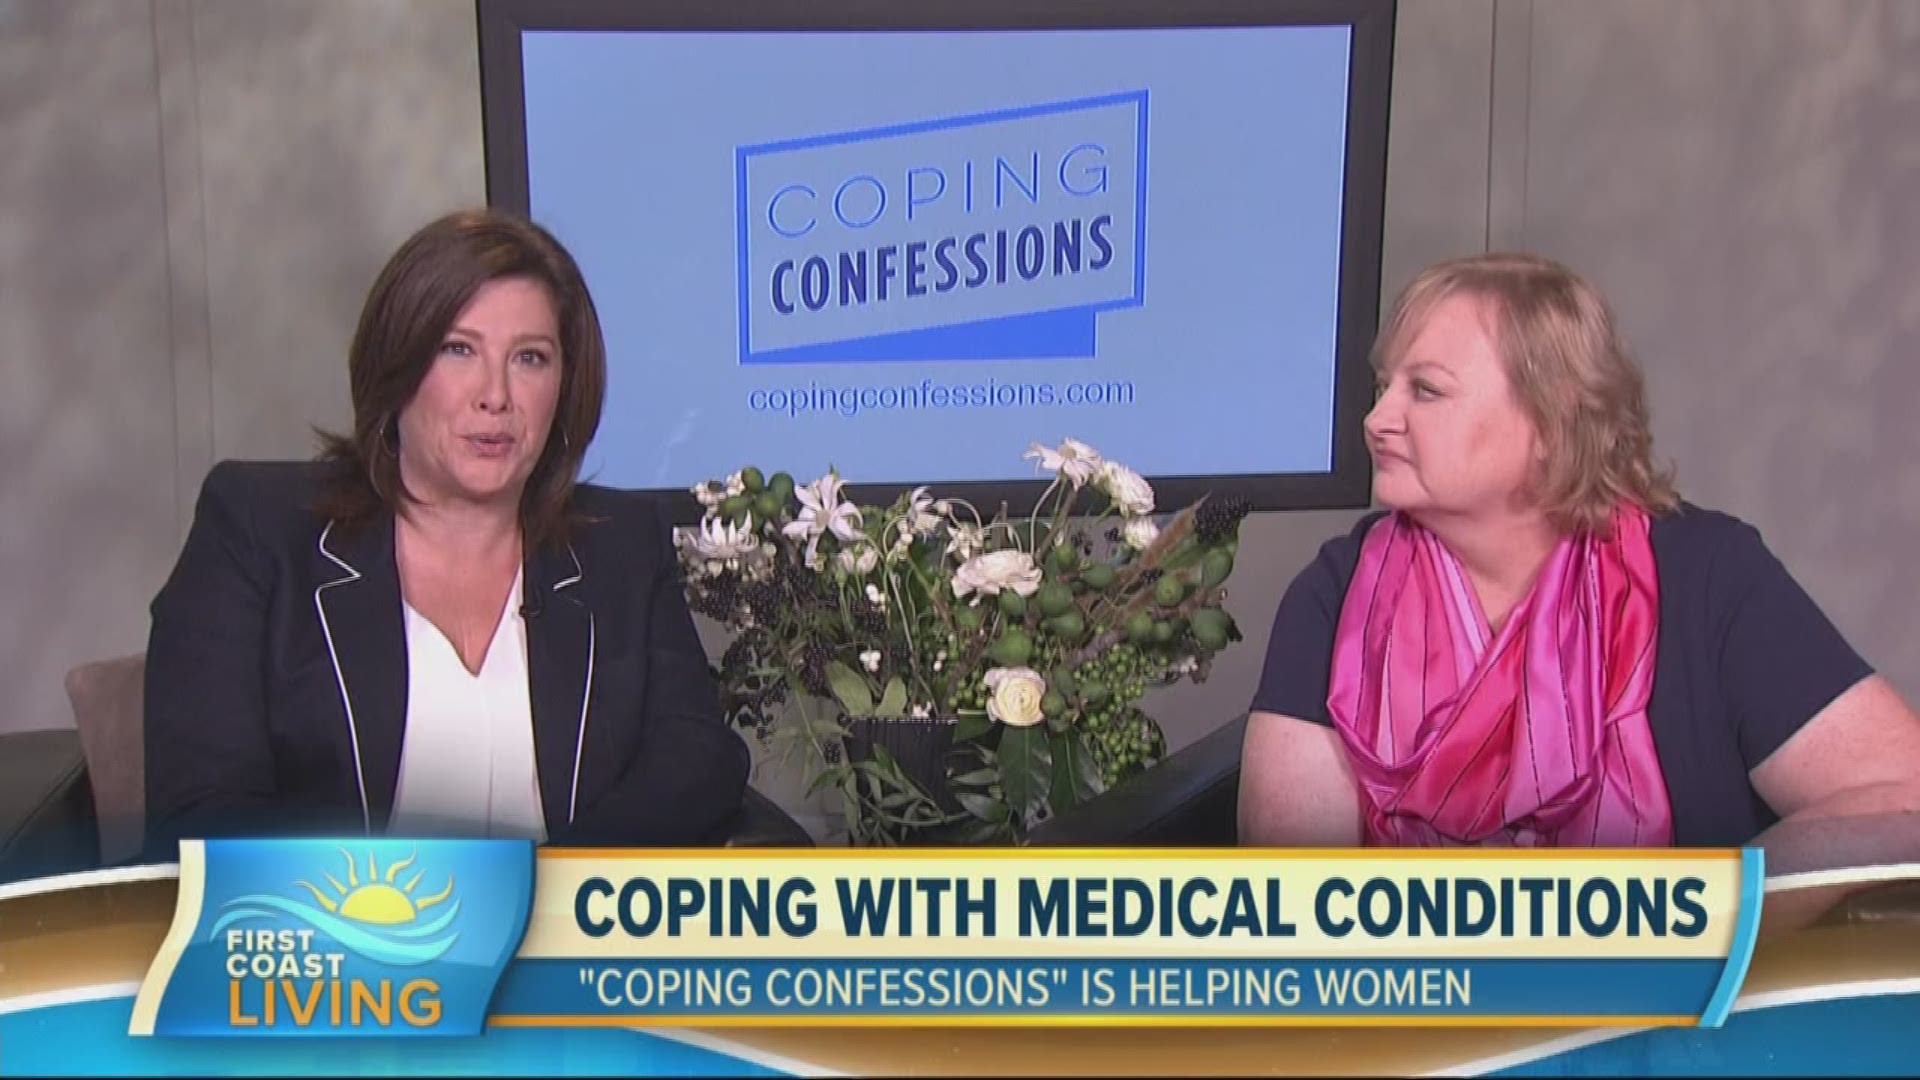 Celebrity psychotherapist shares all the details of 'coping confessions'